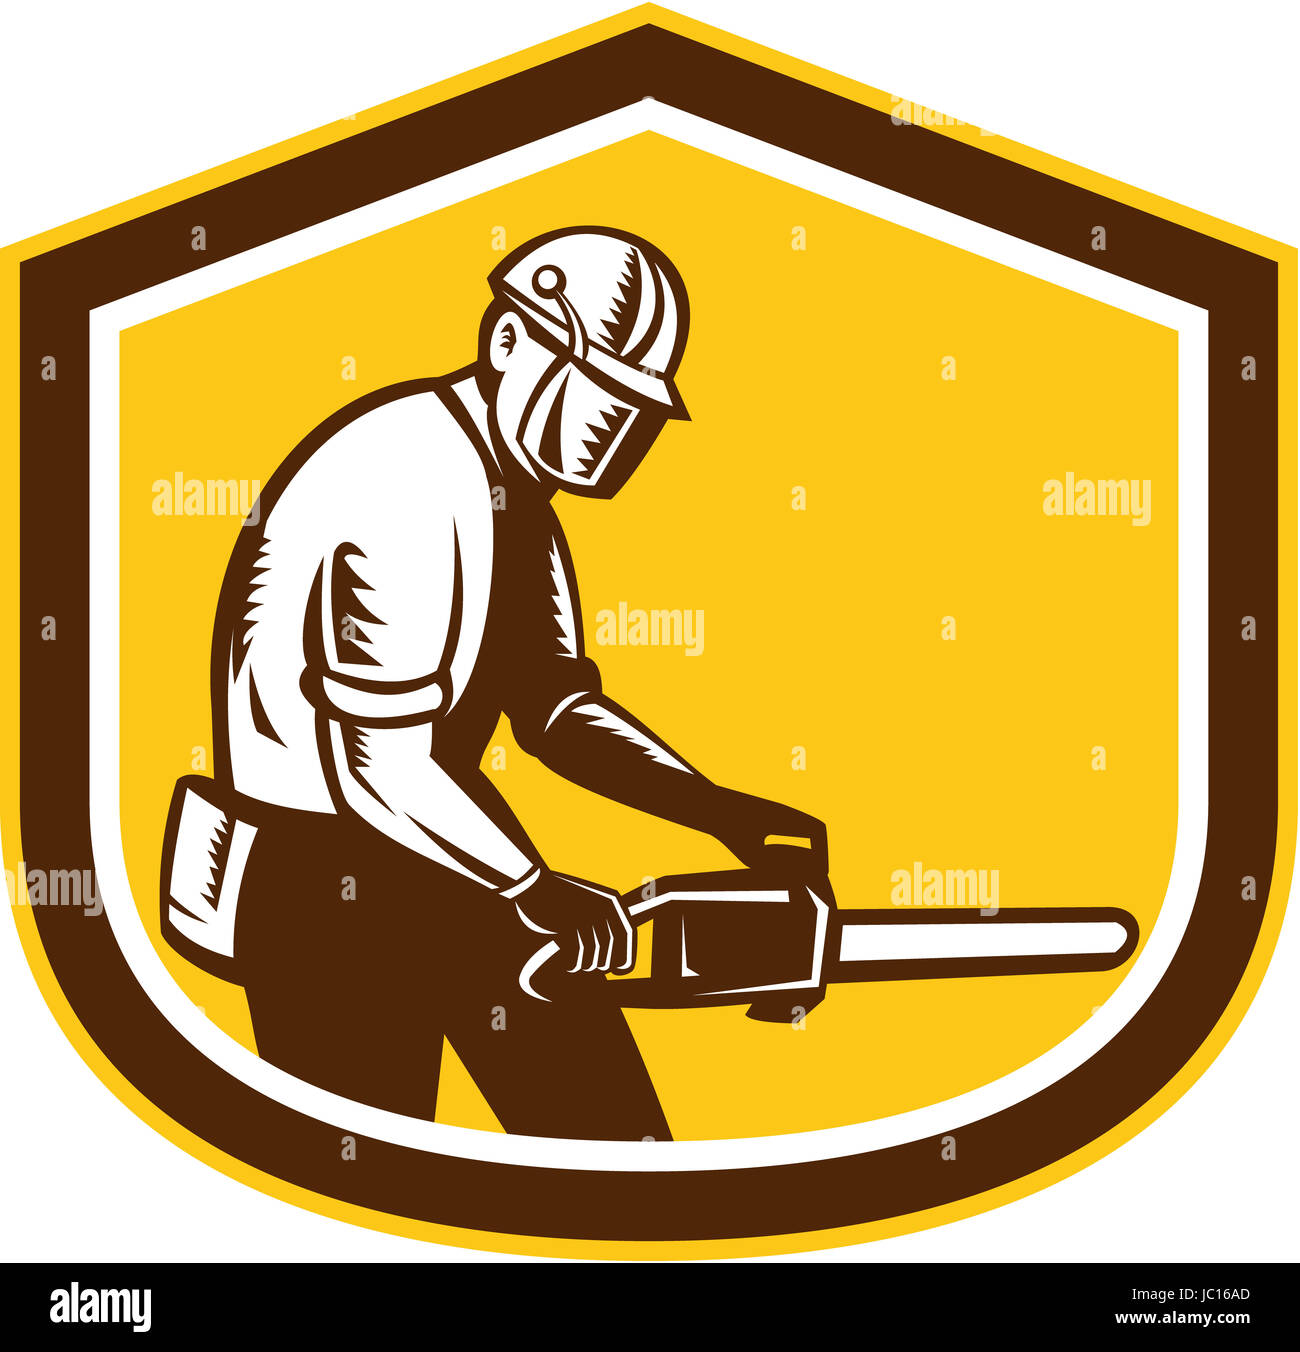 Illustration of lumberjack arborist tree surgeon operating a chainsaw set inside shield crest shape on isolated white background done in retro style. Stock Photo